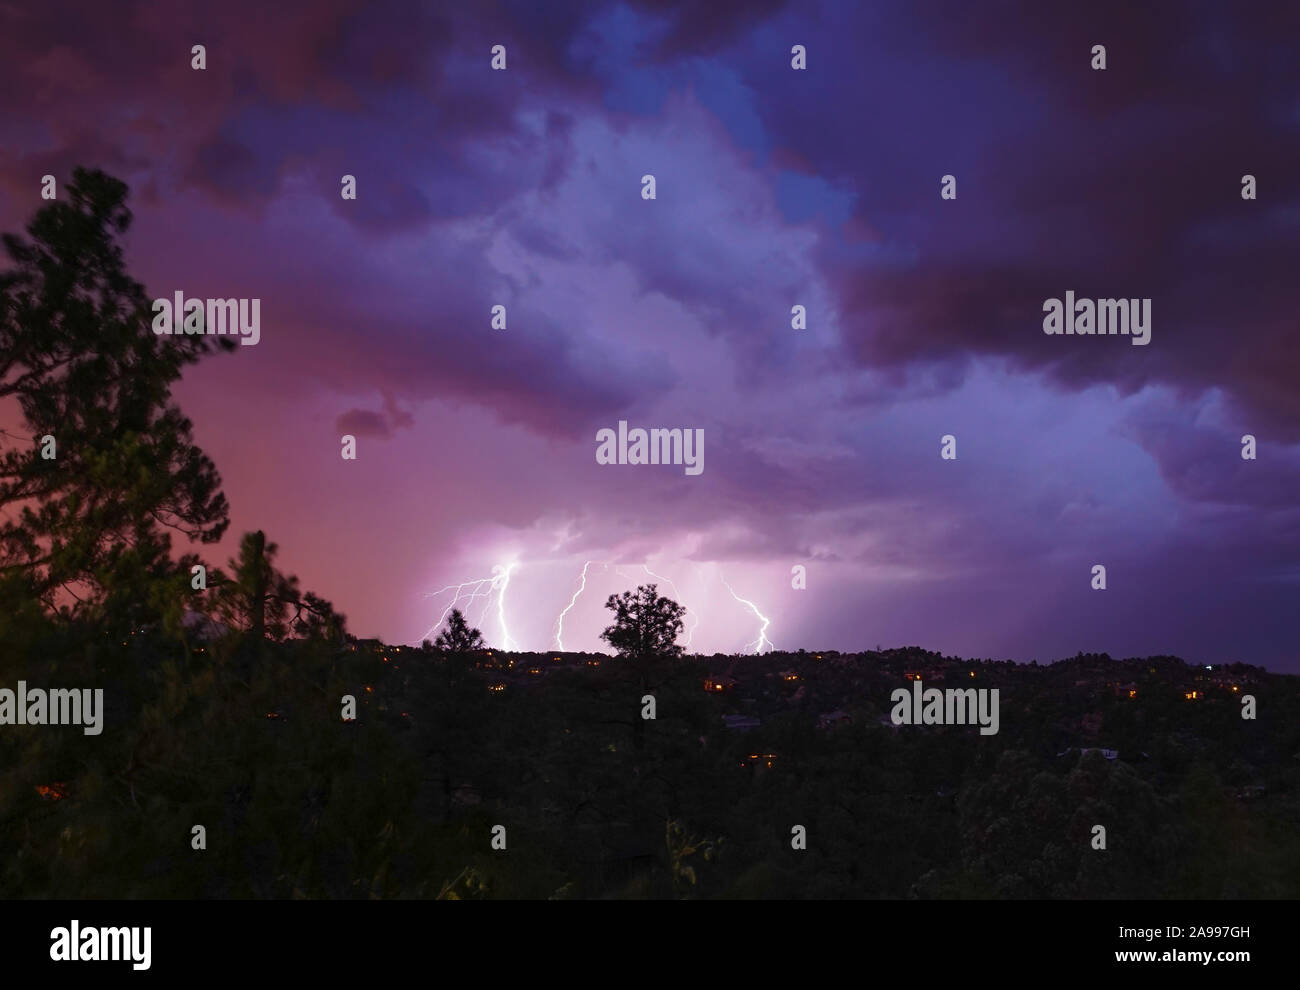 A monsoon lightning storm hits Arizona right after sunset, and accents the dramatic sky's colors. Stock Photo